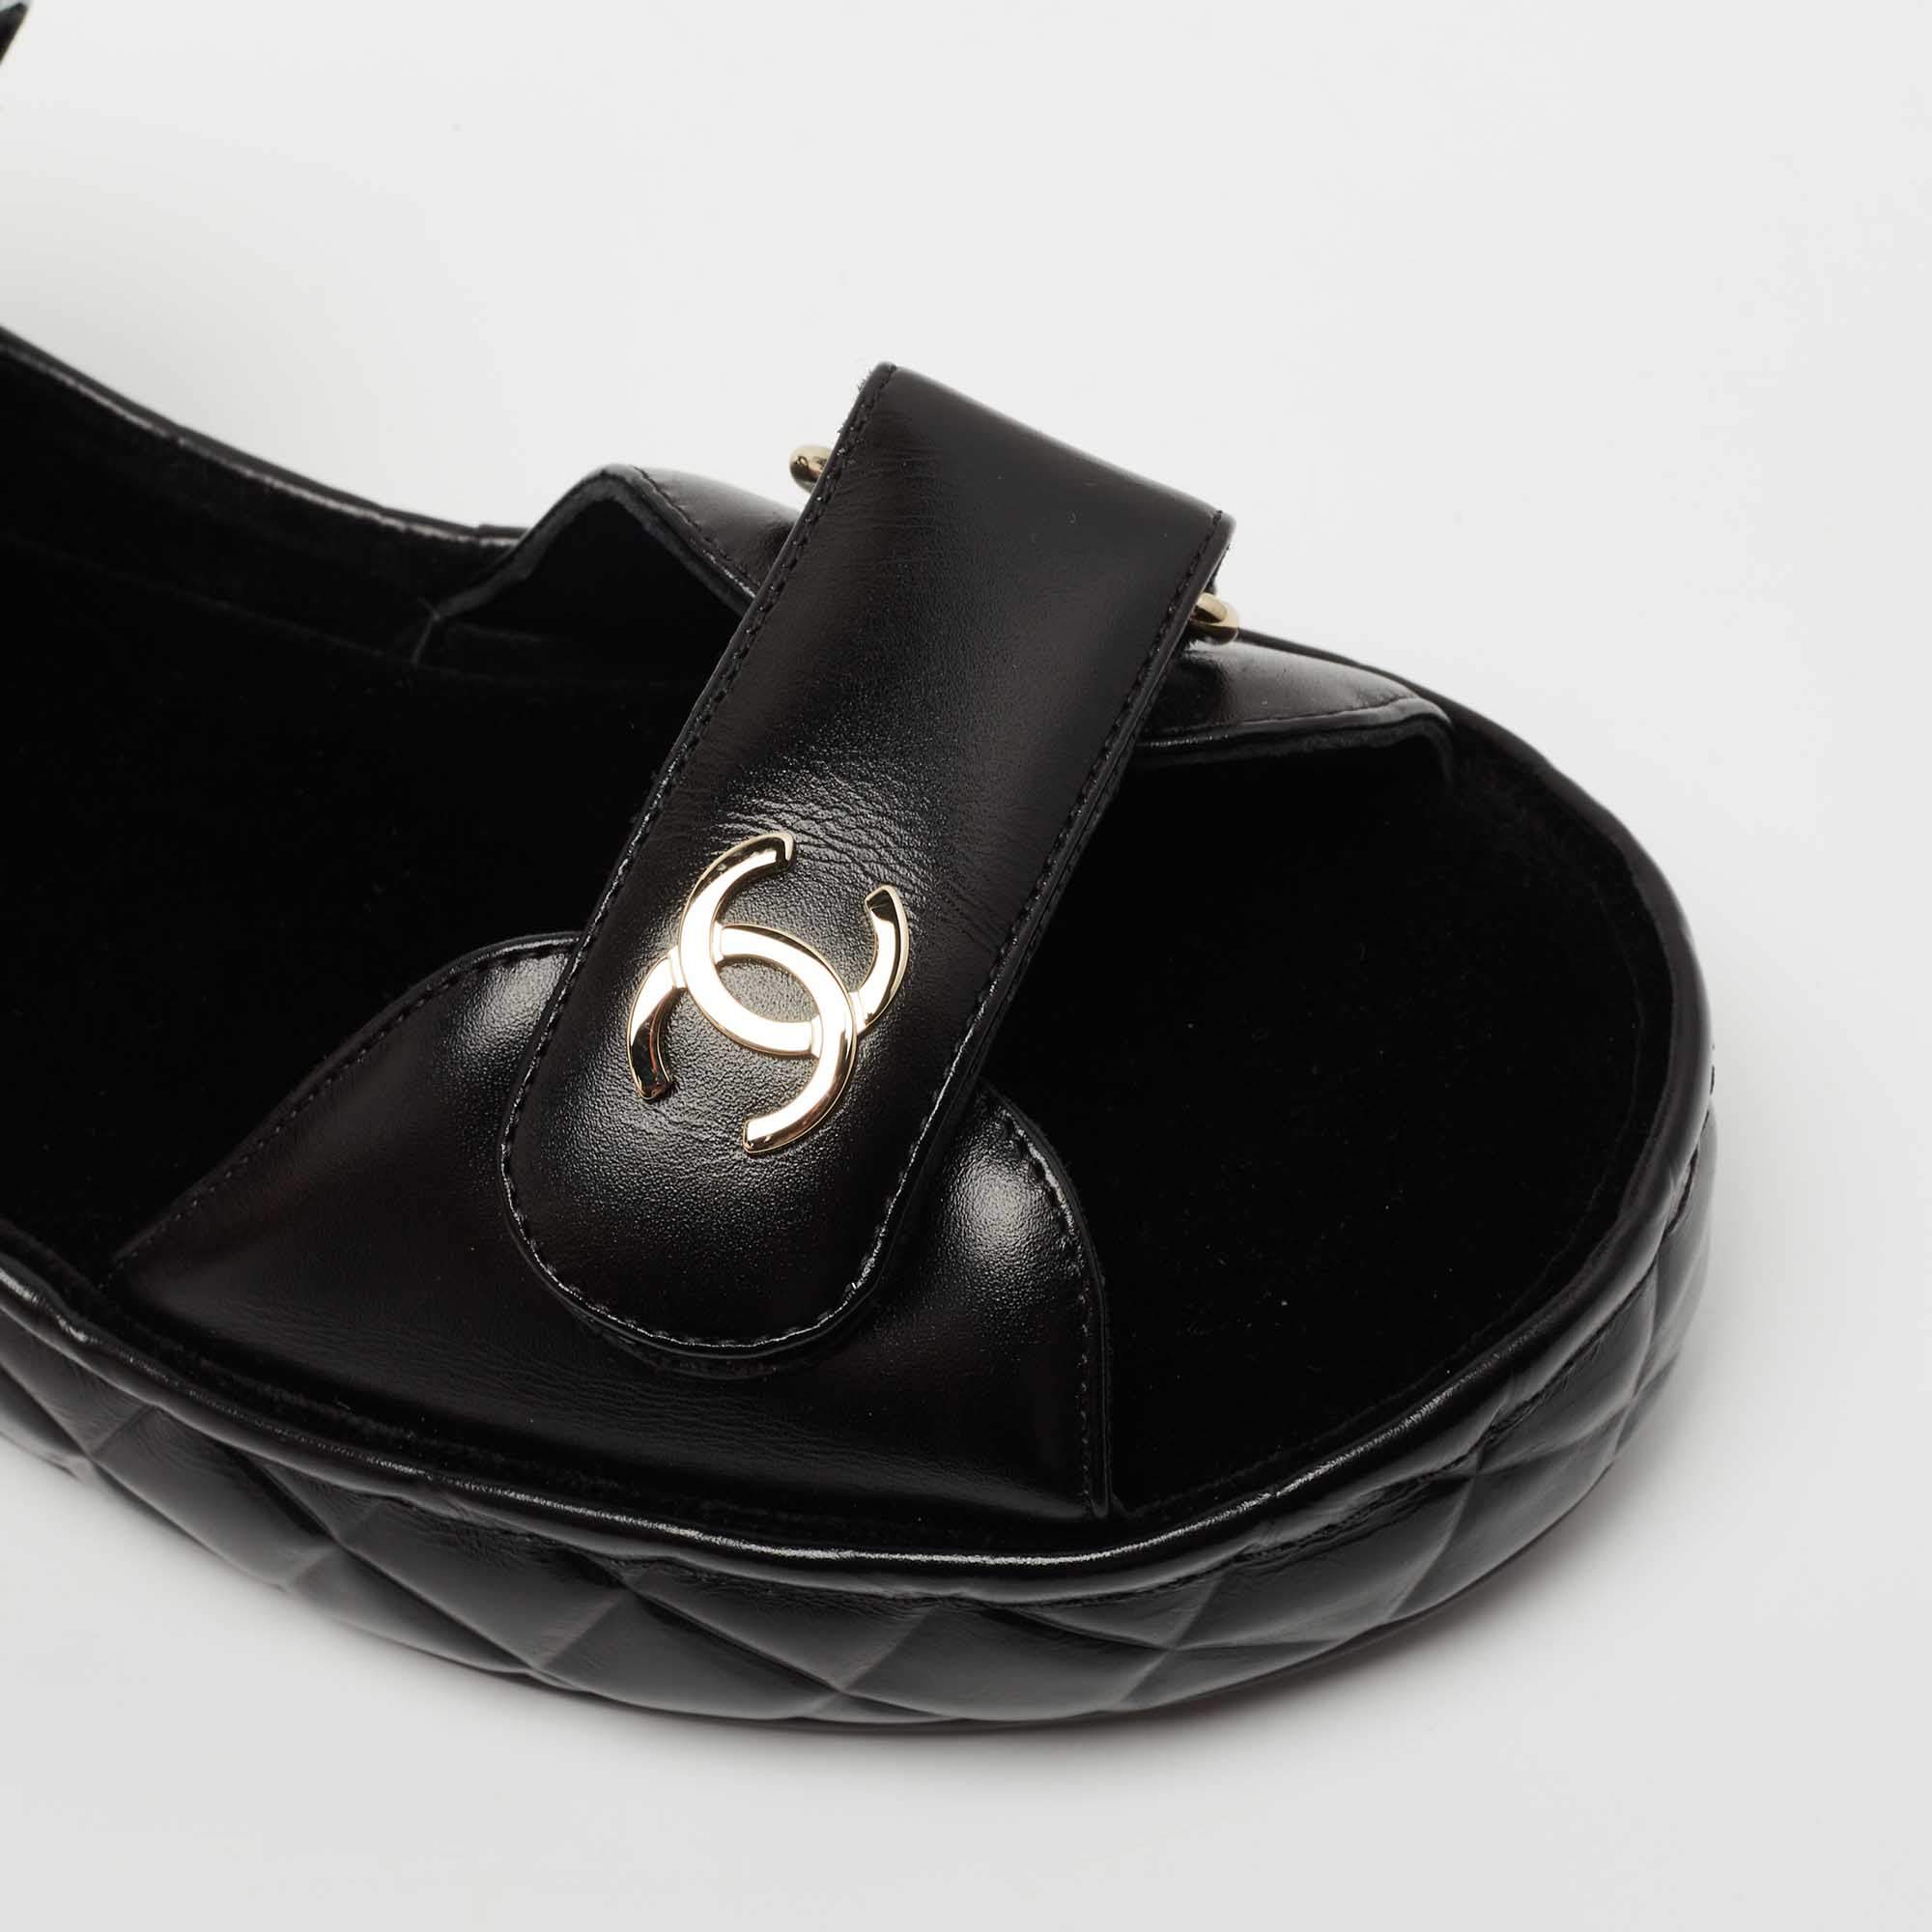 Chanel Black Leather CC Dad Flat Sandals Size 39 Chanel